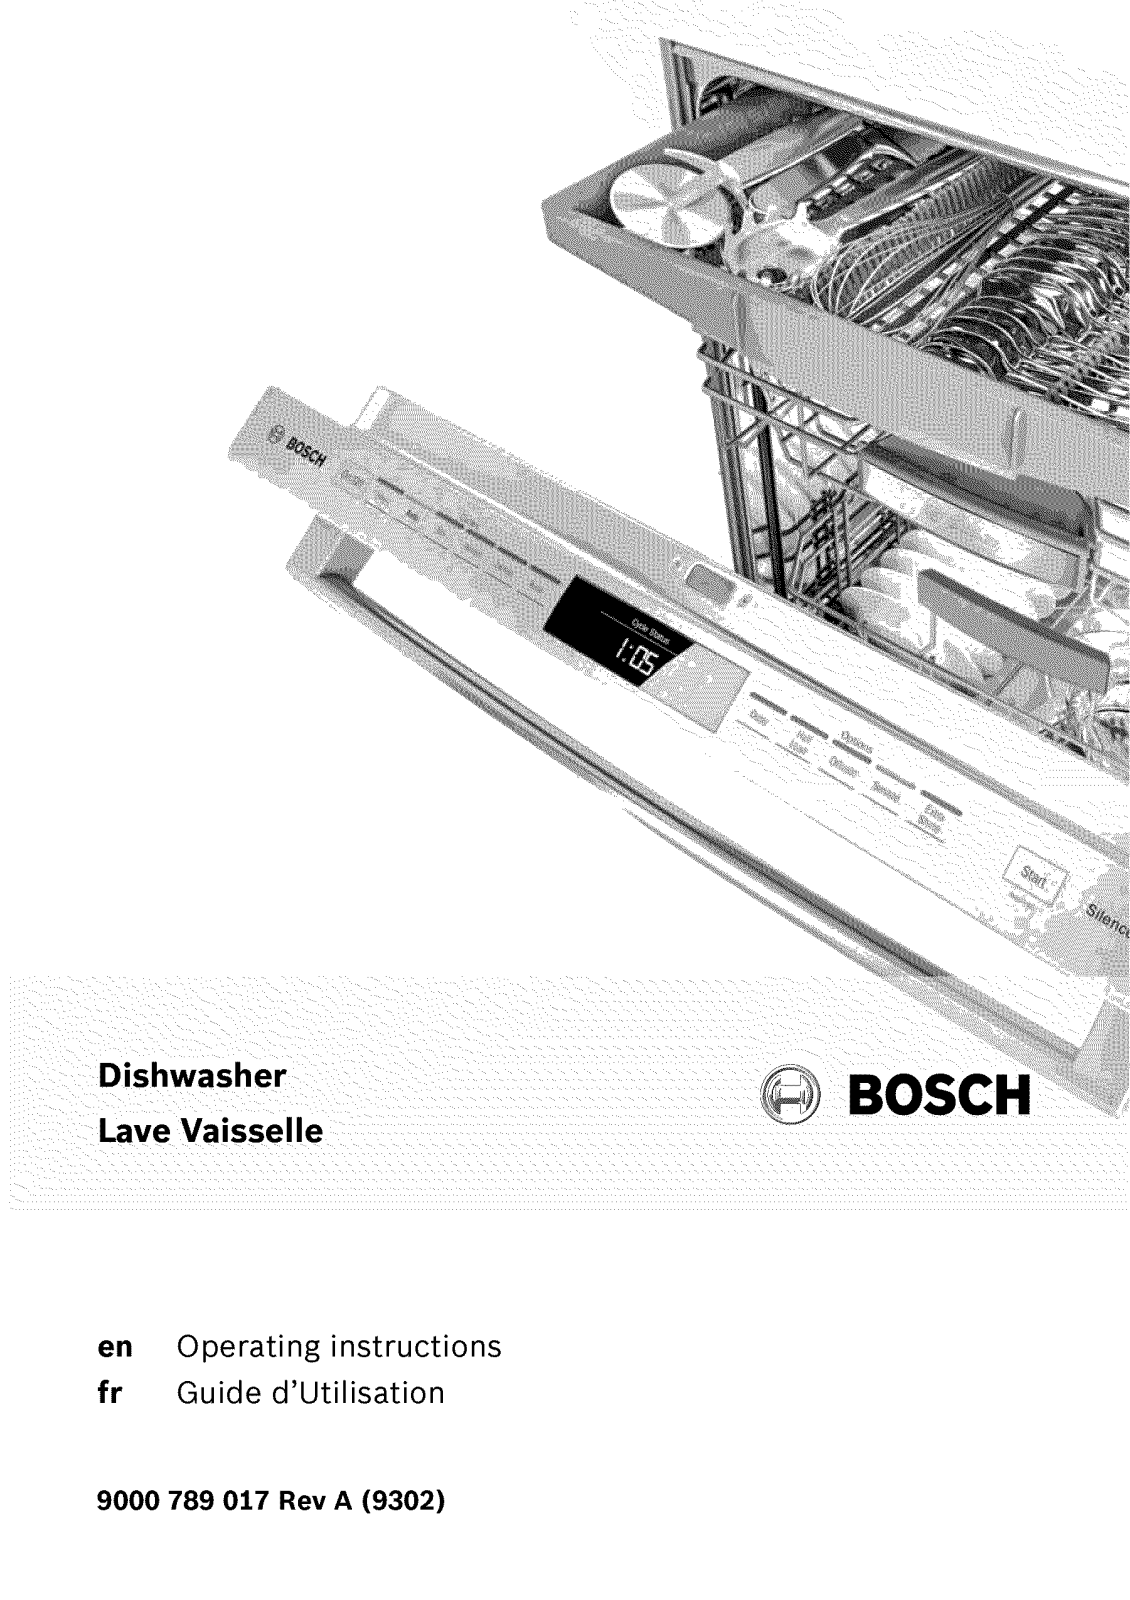 Bosch SHE65T52UC/01, SHE65T52UC/02, SHE68T56UC/02, SHP65T55UC/01, SHP65T55UC/07 Owner’s Manual